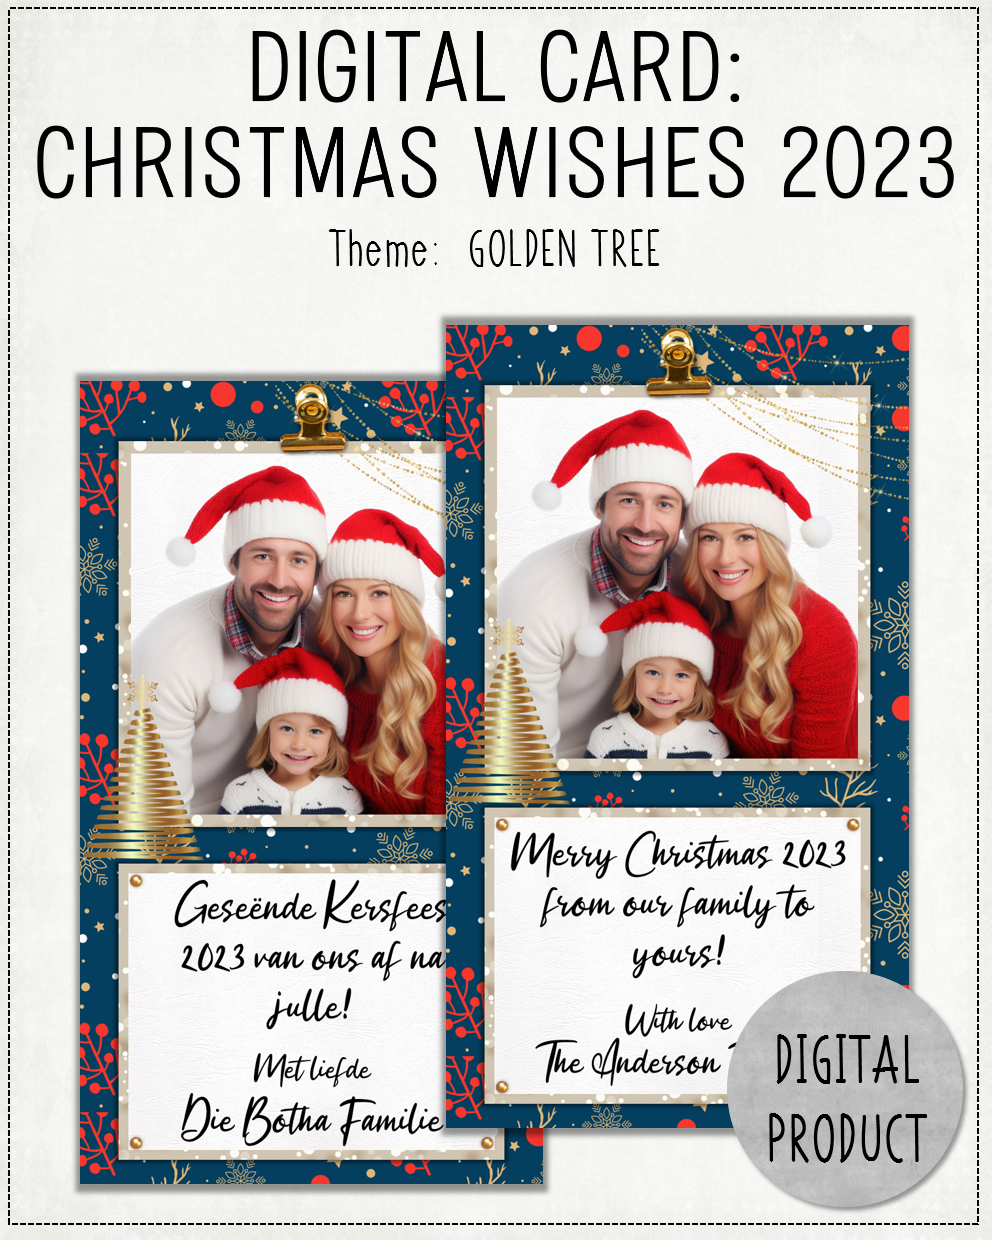 DIGITAL CARD:  Christmas Wishes 2023 - Golden Tree (Afrikaans / English)